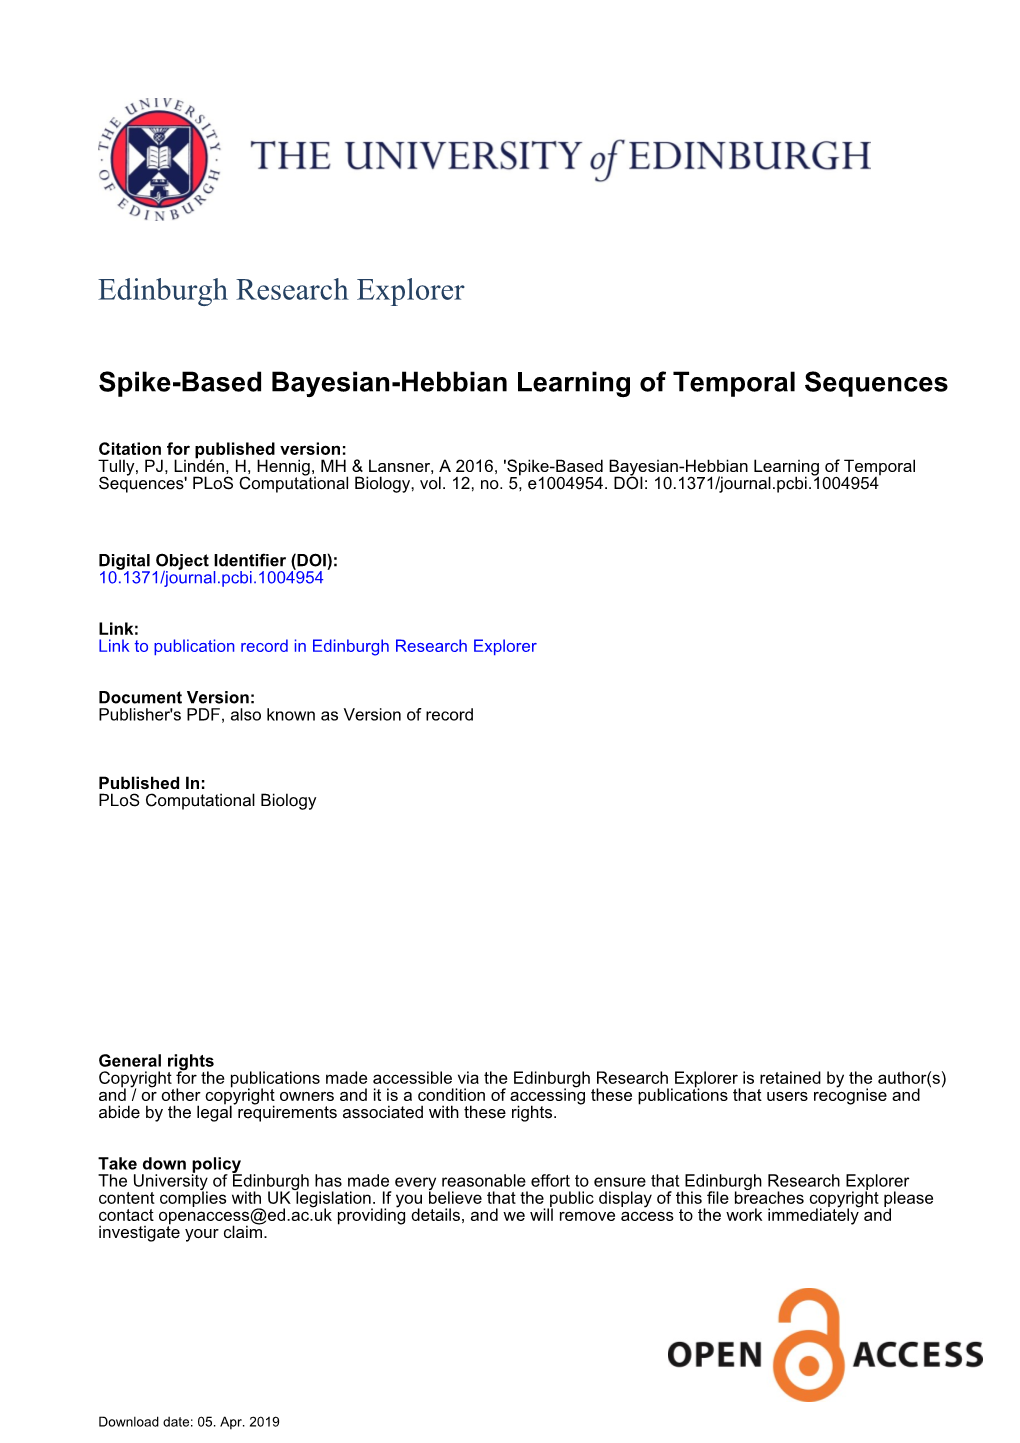 Spike-Based Bayesian-Hebbian Learning of Temporal Sequences